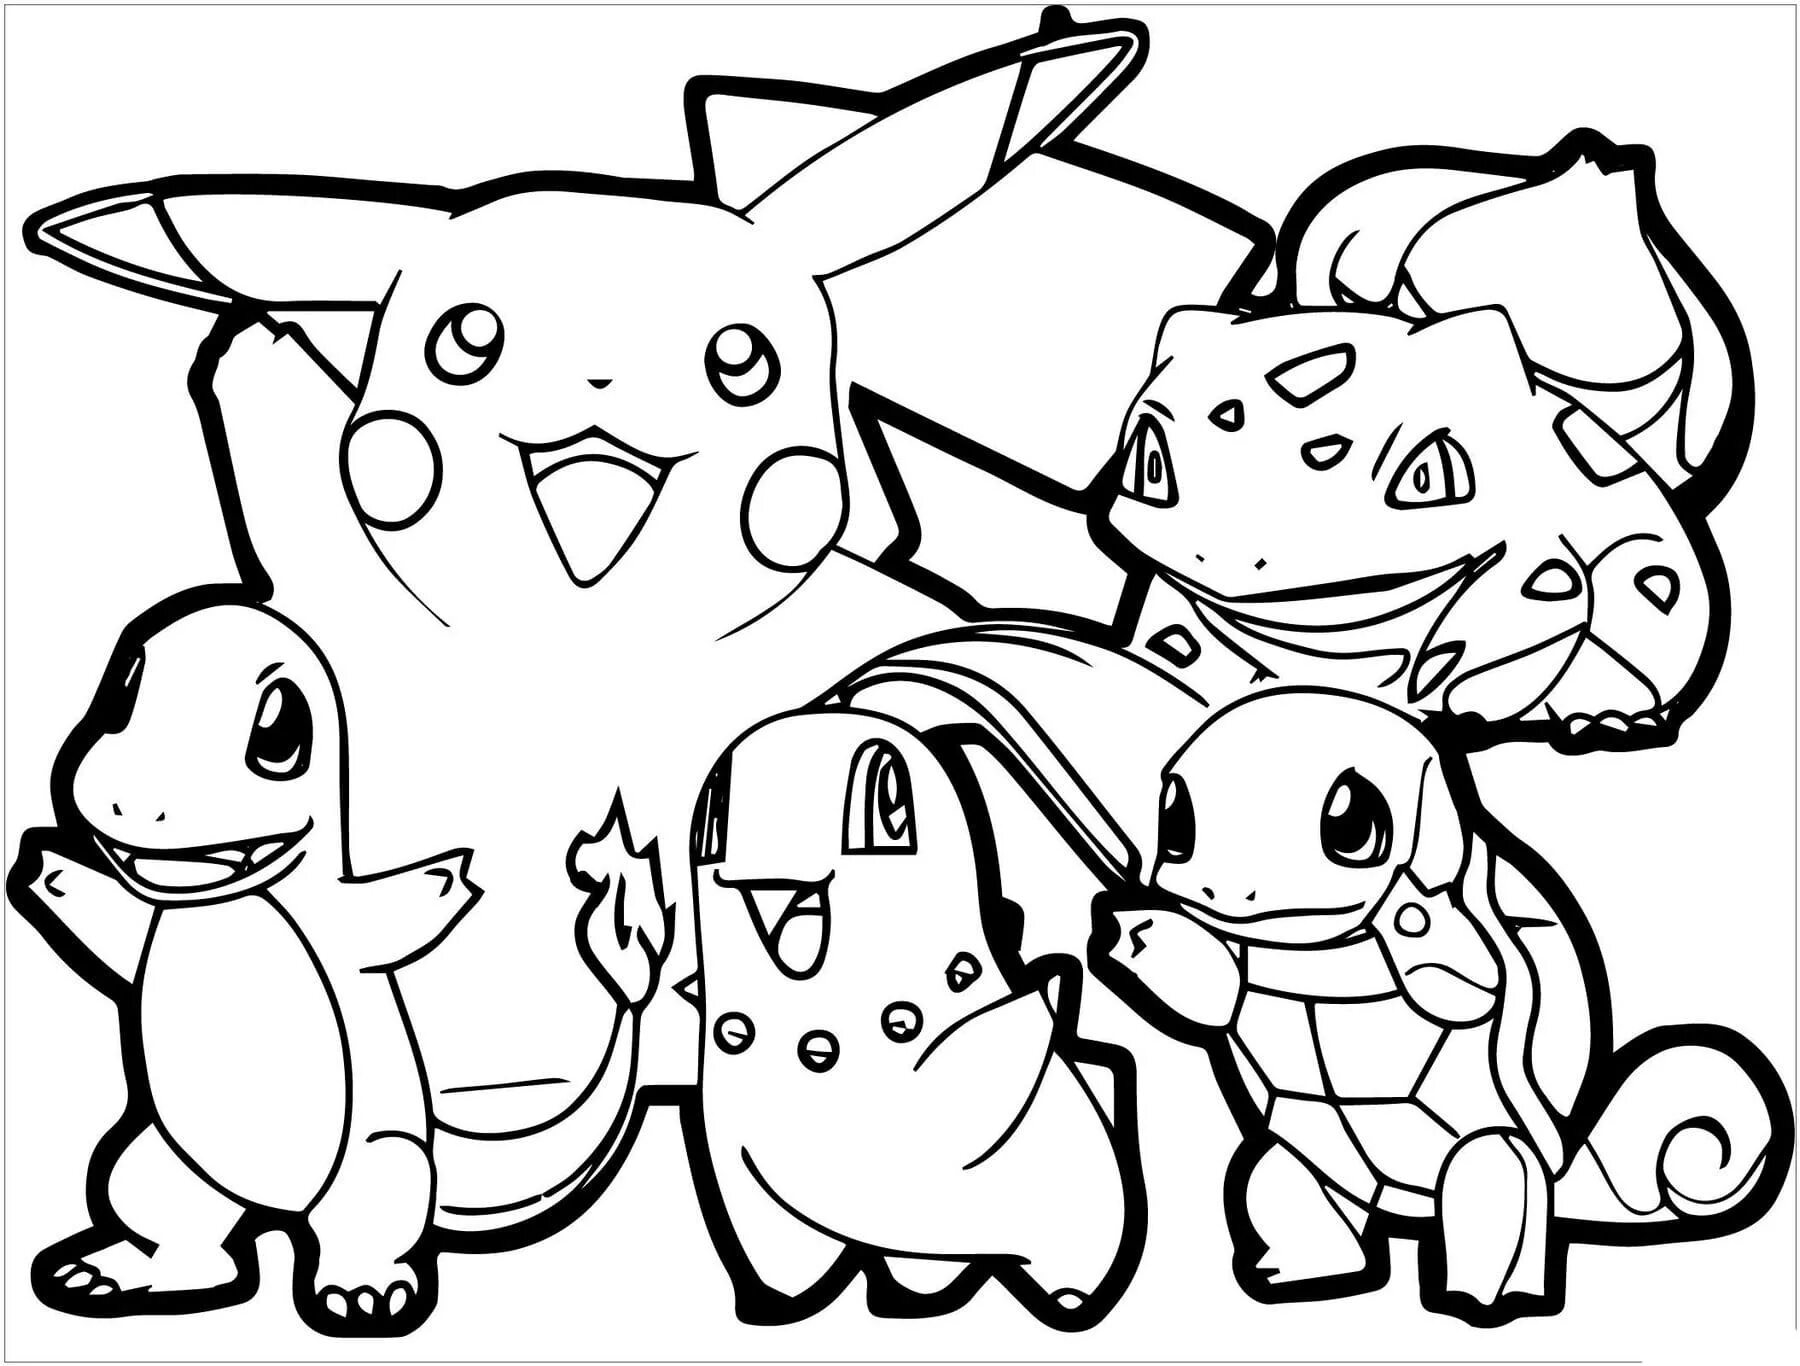 Delightful good quality pokemon coloring page